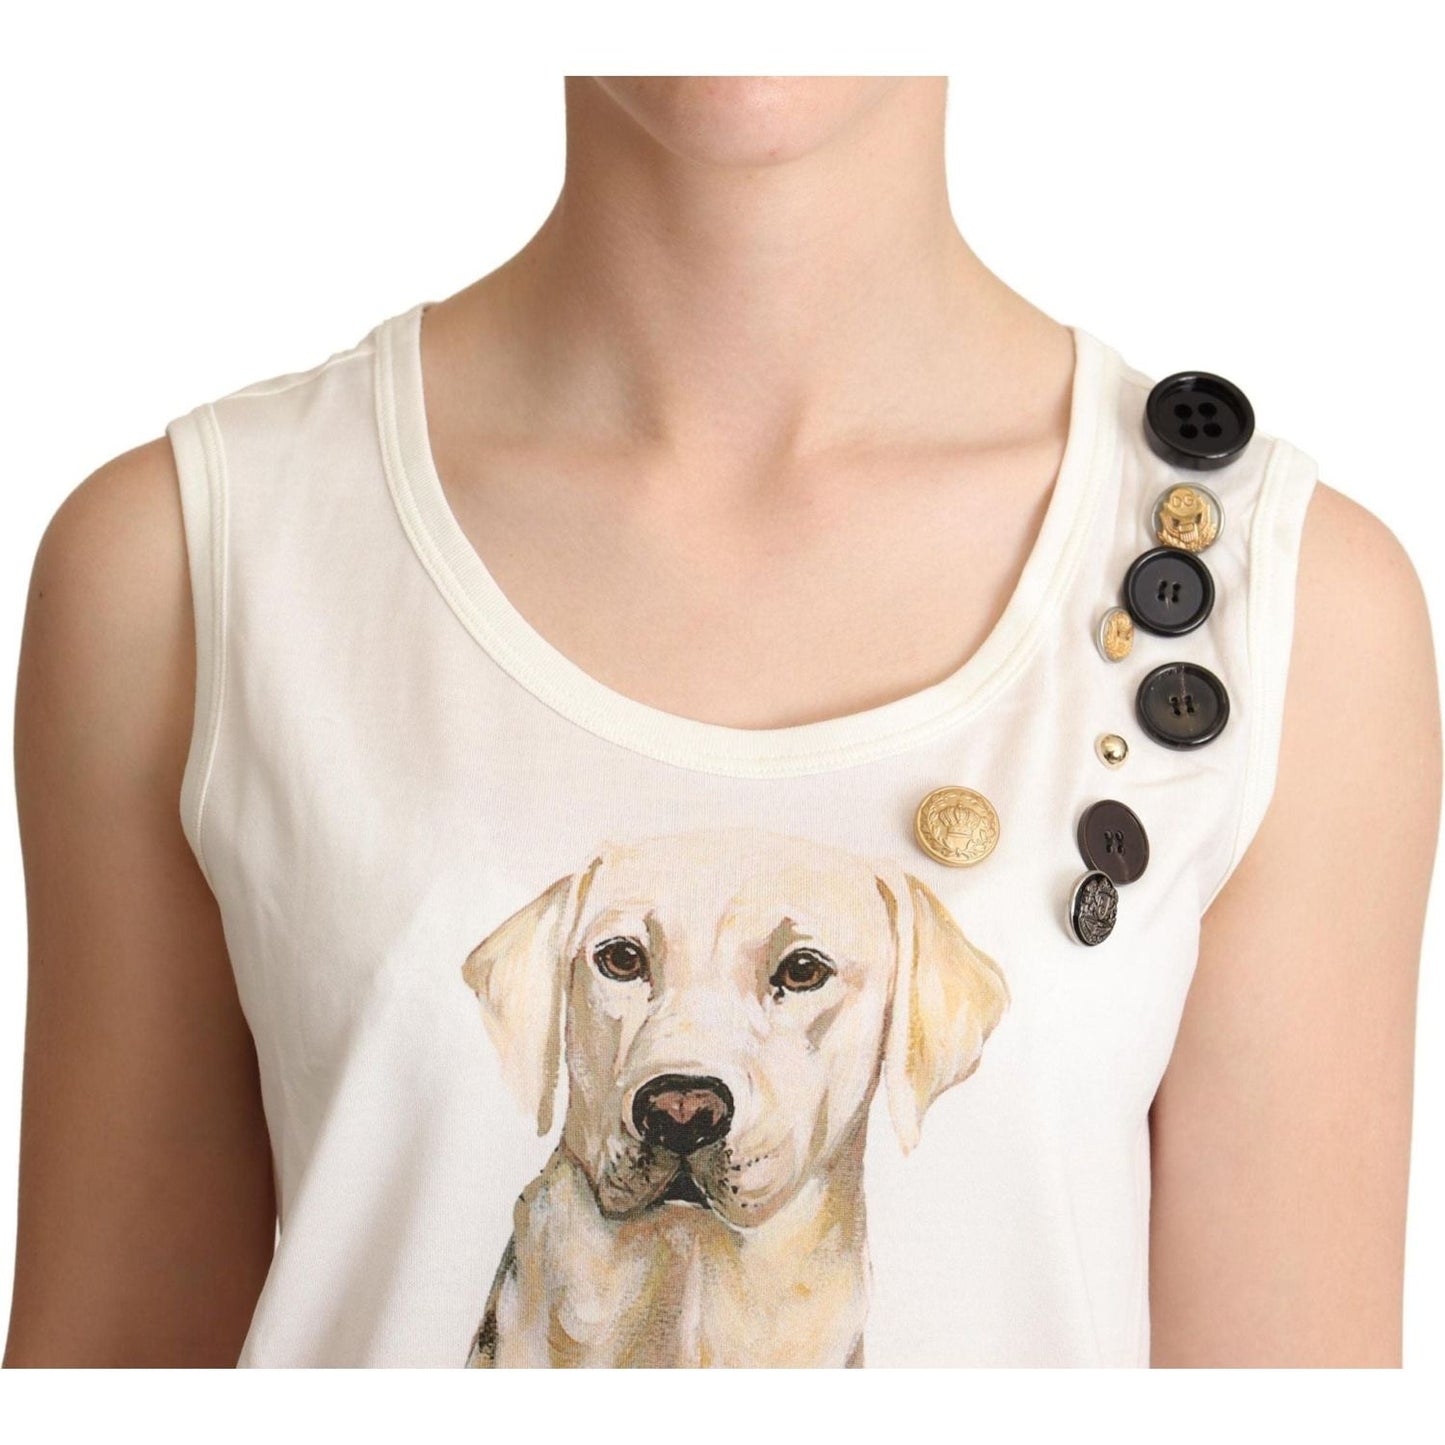 Dolce & Gabbana Chic Canine Floral Sleeveless Tank white-dog-floral-print-embellished-t-shirt IMG_0333-scaled-fca76f41-022.jpg